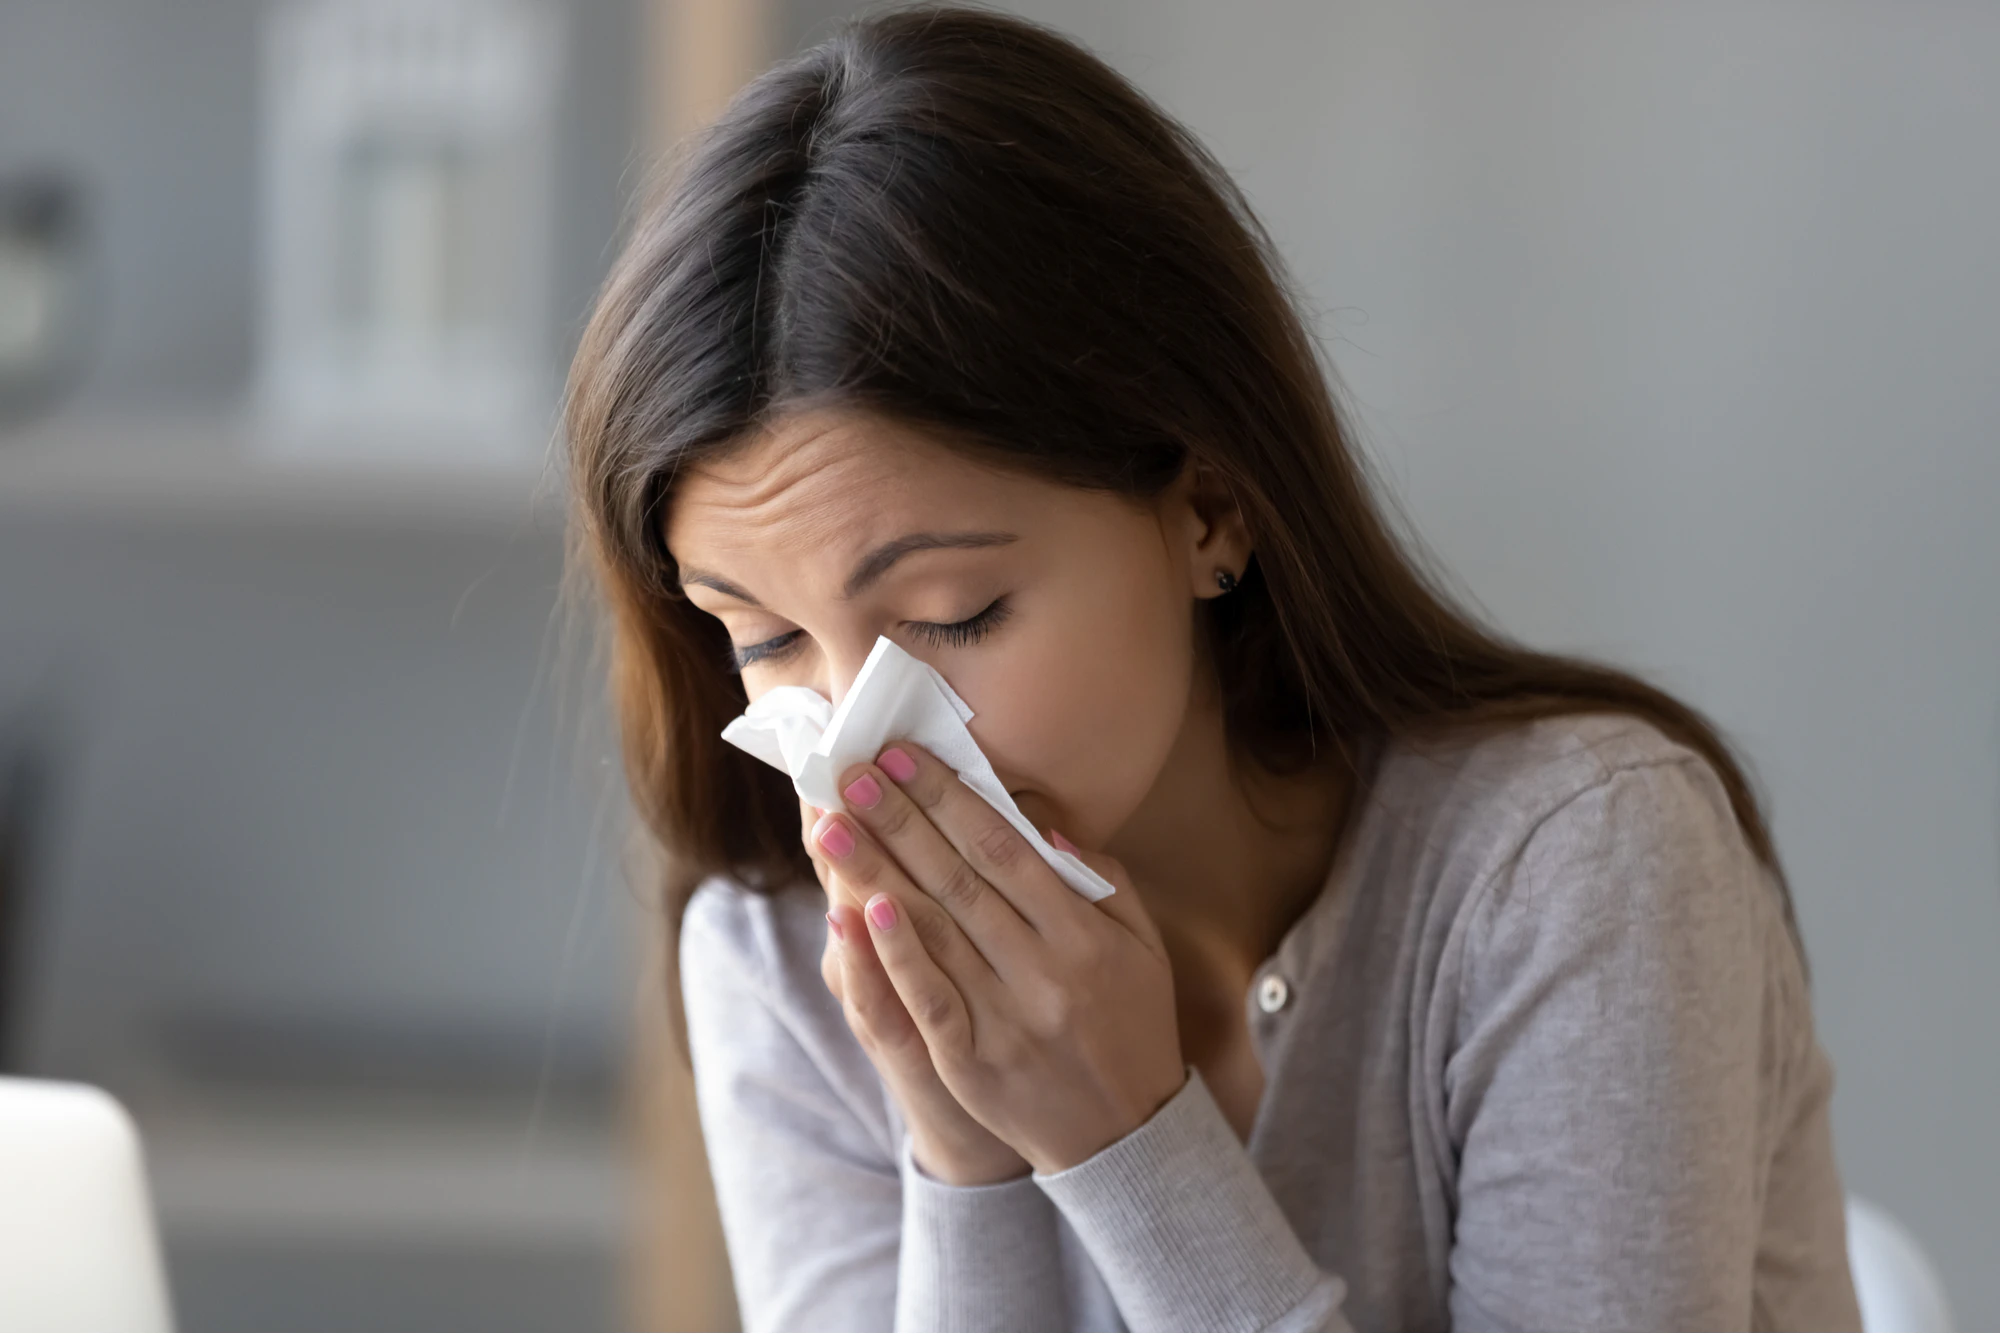 How to Stop a Runny Nose Fast Without Medicine